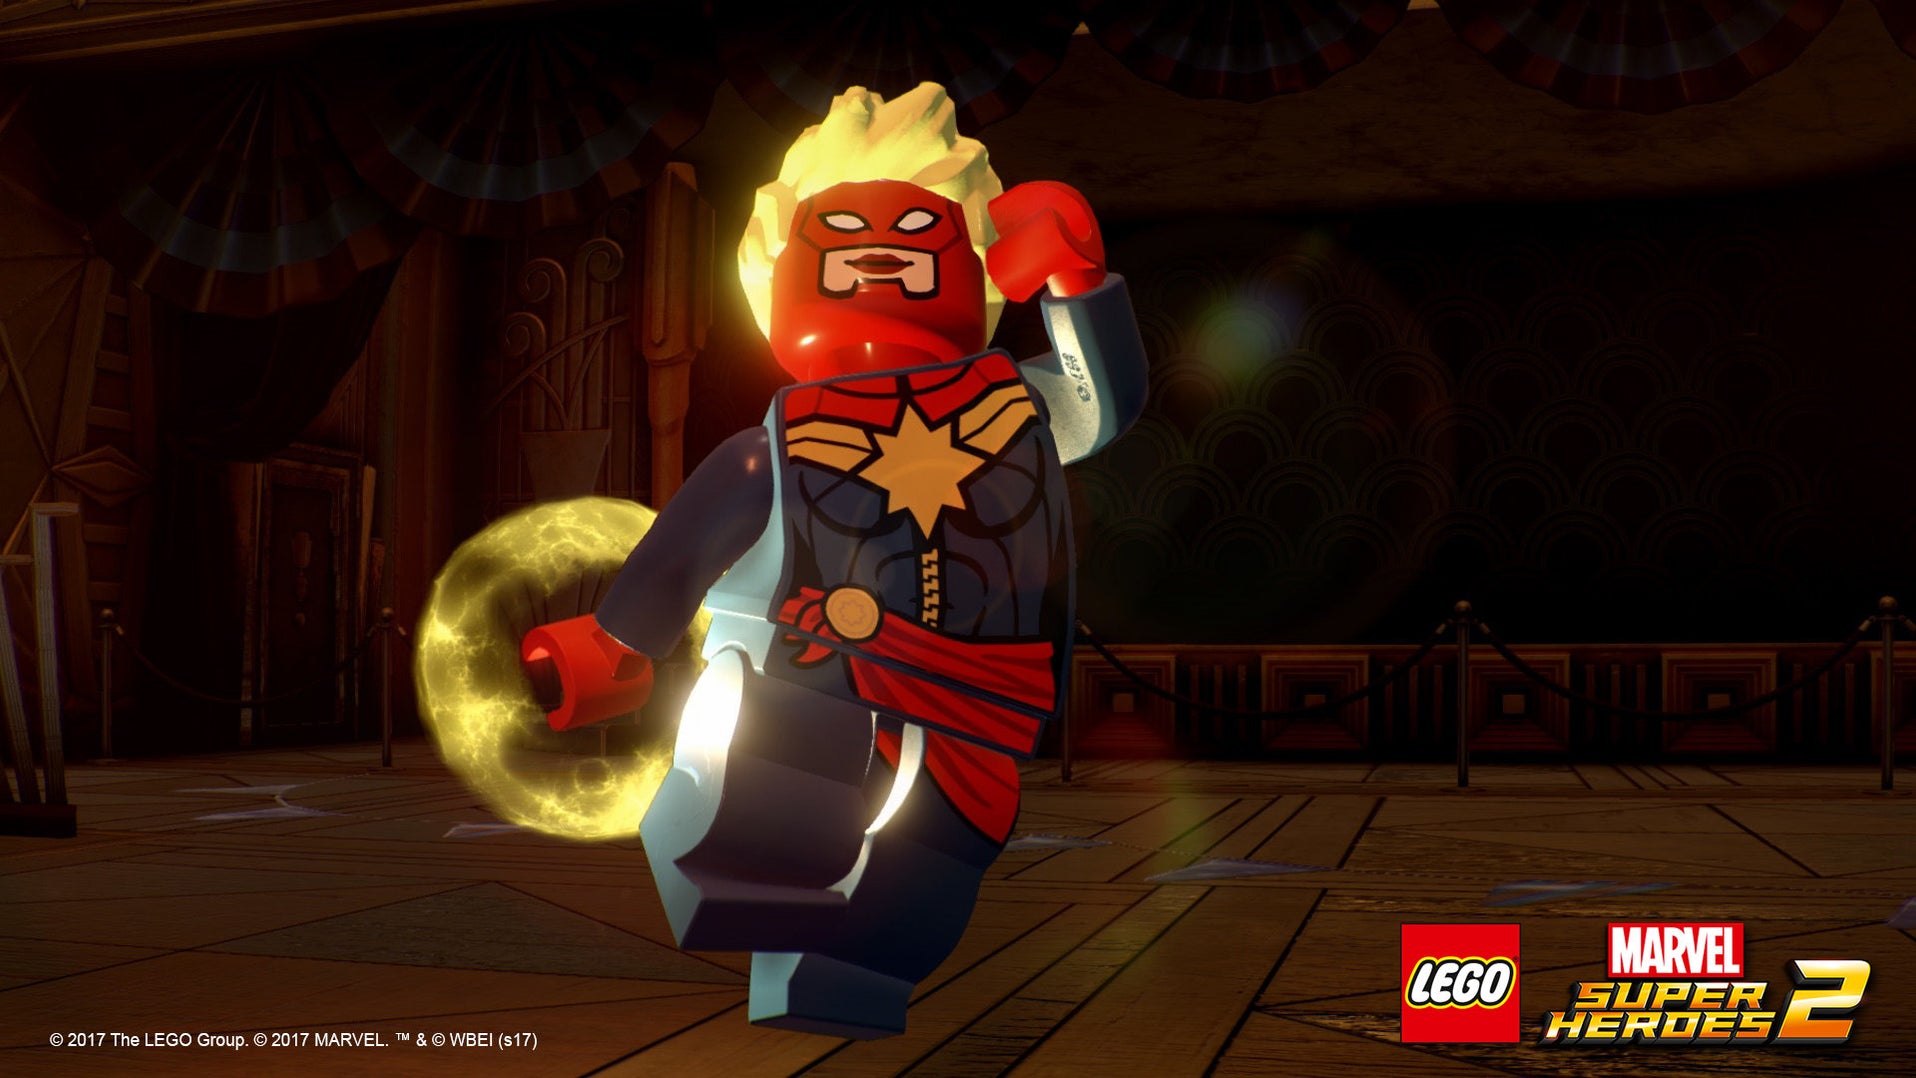 lego marvel super heroes 2 nintendo switch review